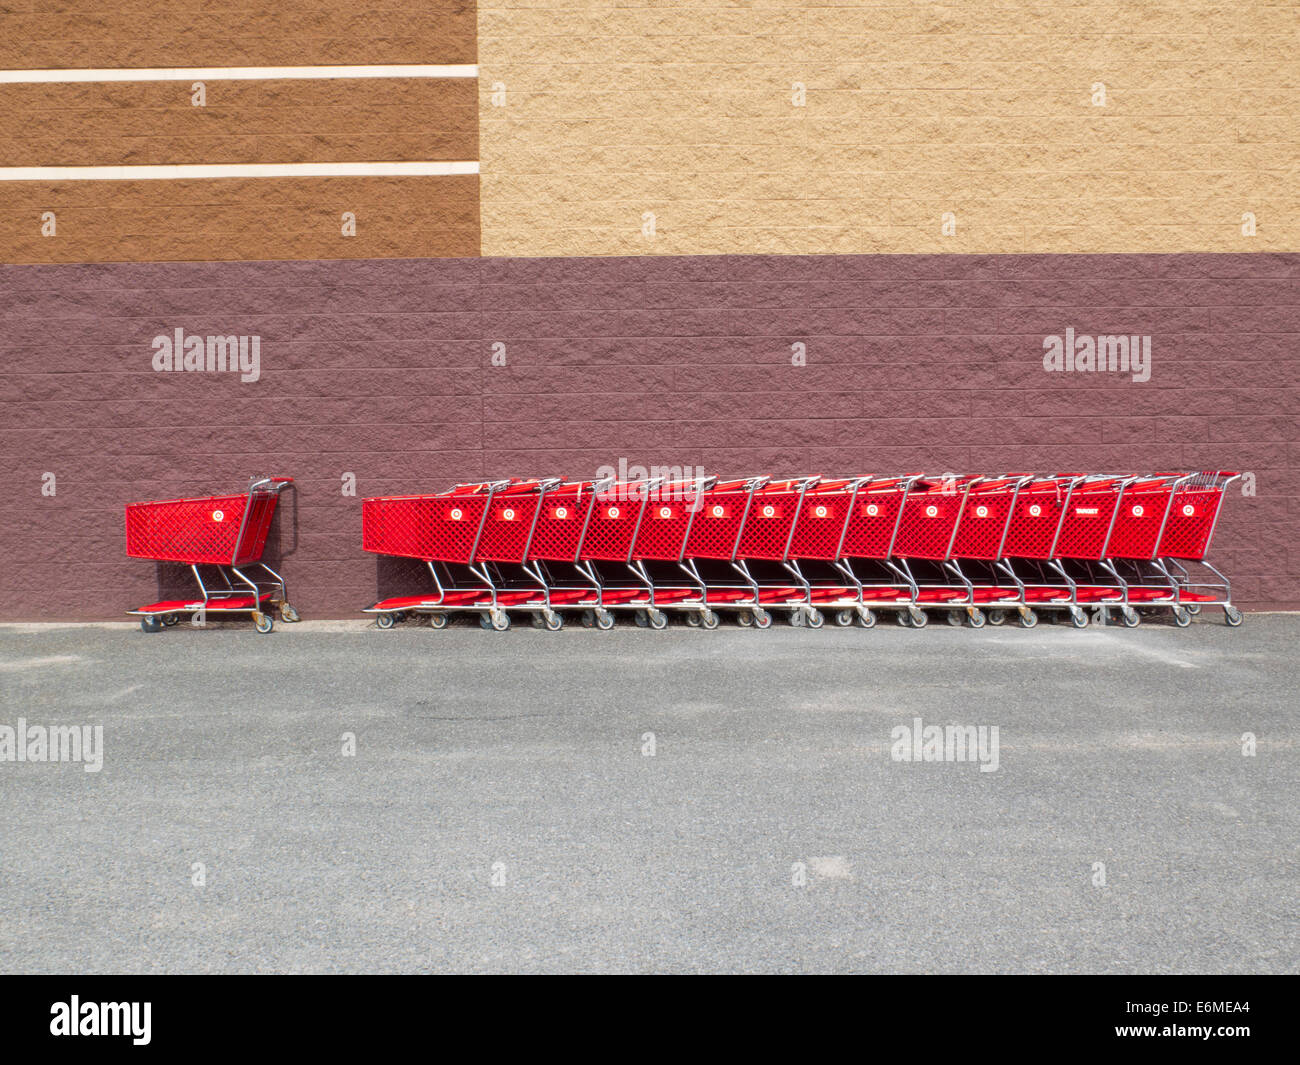 Shopping carts line up at a Target retail store in Pittsfield Massachusetts. Stock Photo